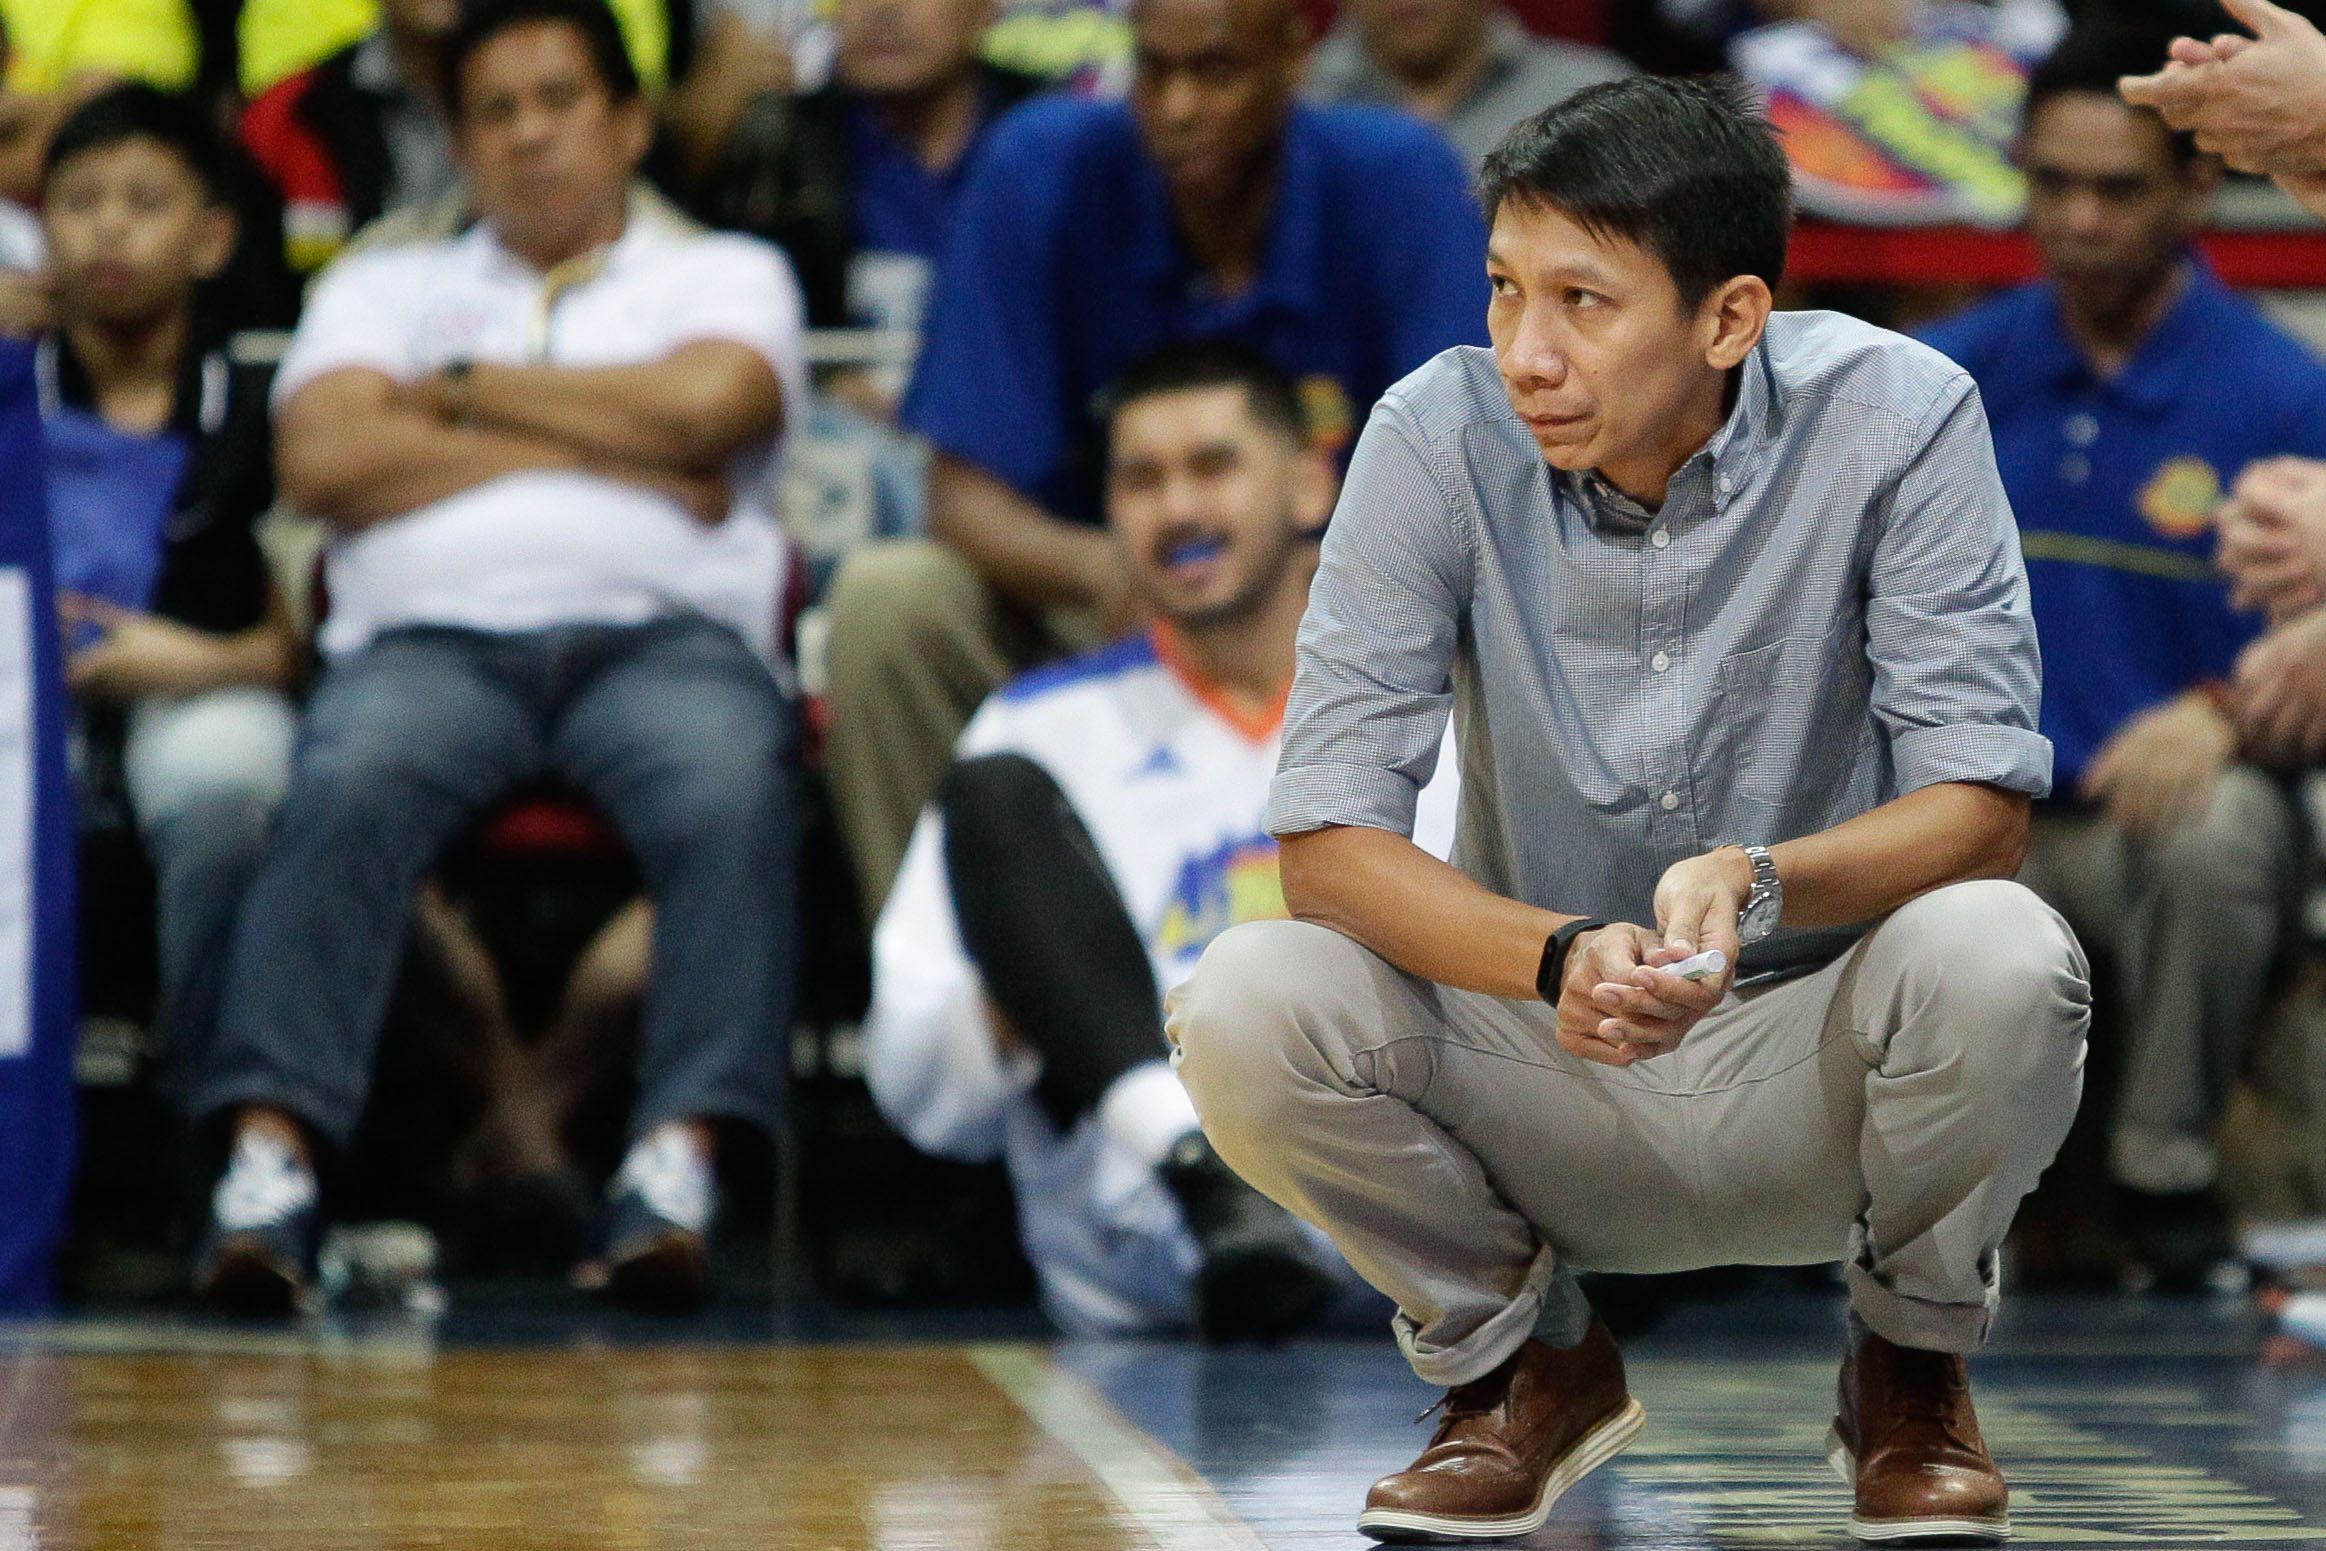 Nash Racela on Game 6: ‘We want to deal with this defeat professionally’